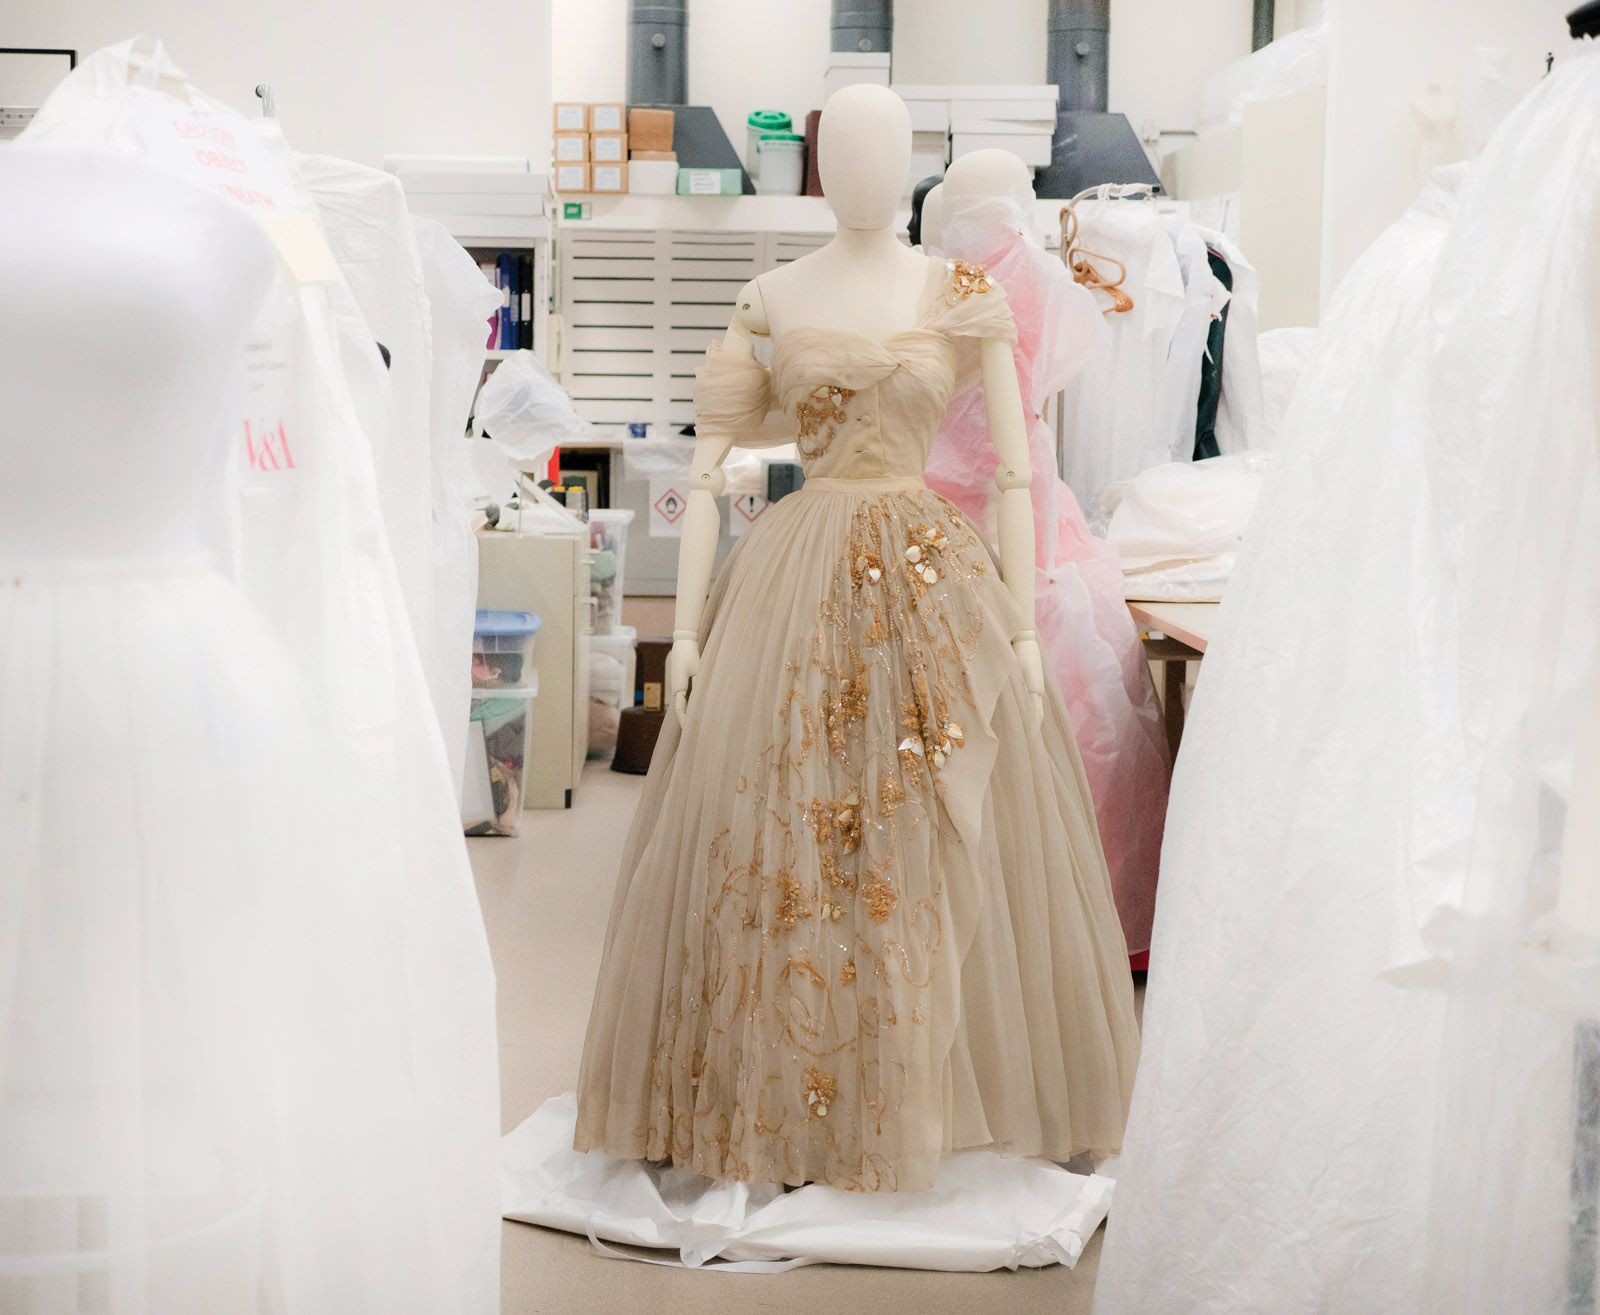 Pure Michigan' is the new look for bridal gowns, veils